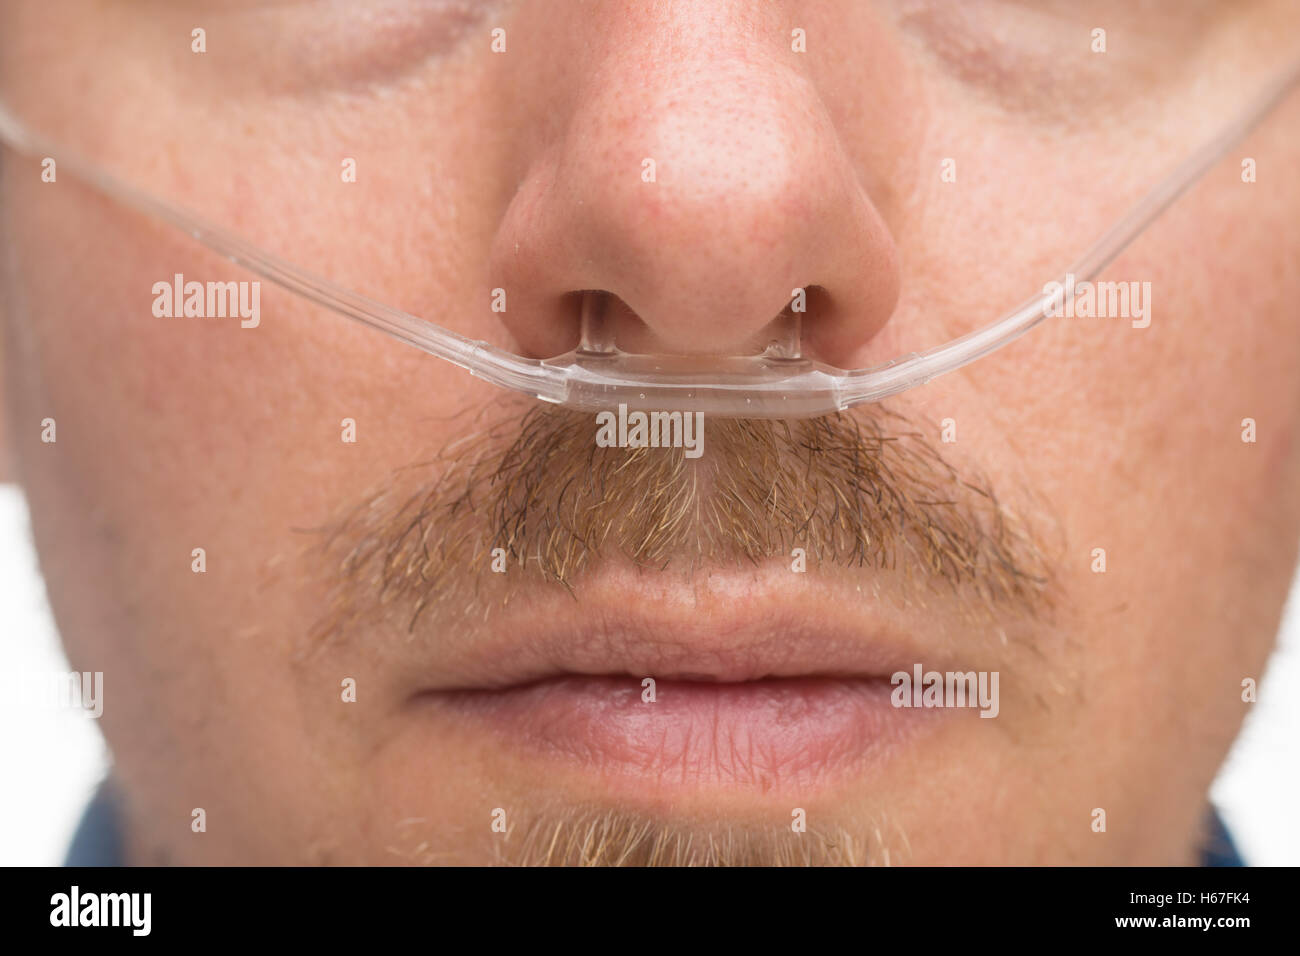 Nasal cannula for oxygen delivery on a bearded man Stock Photo